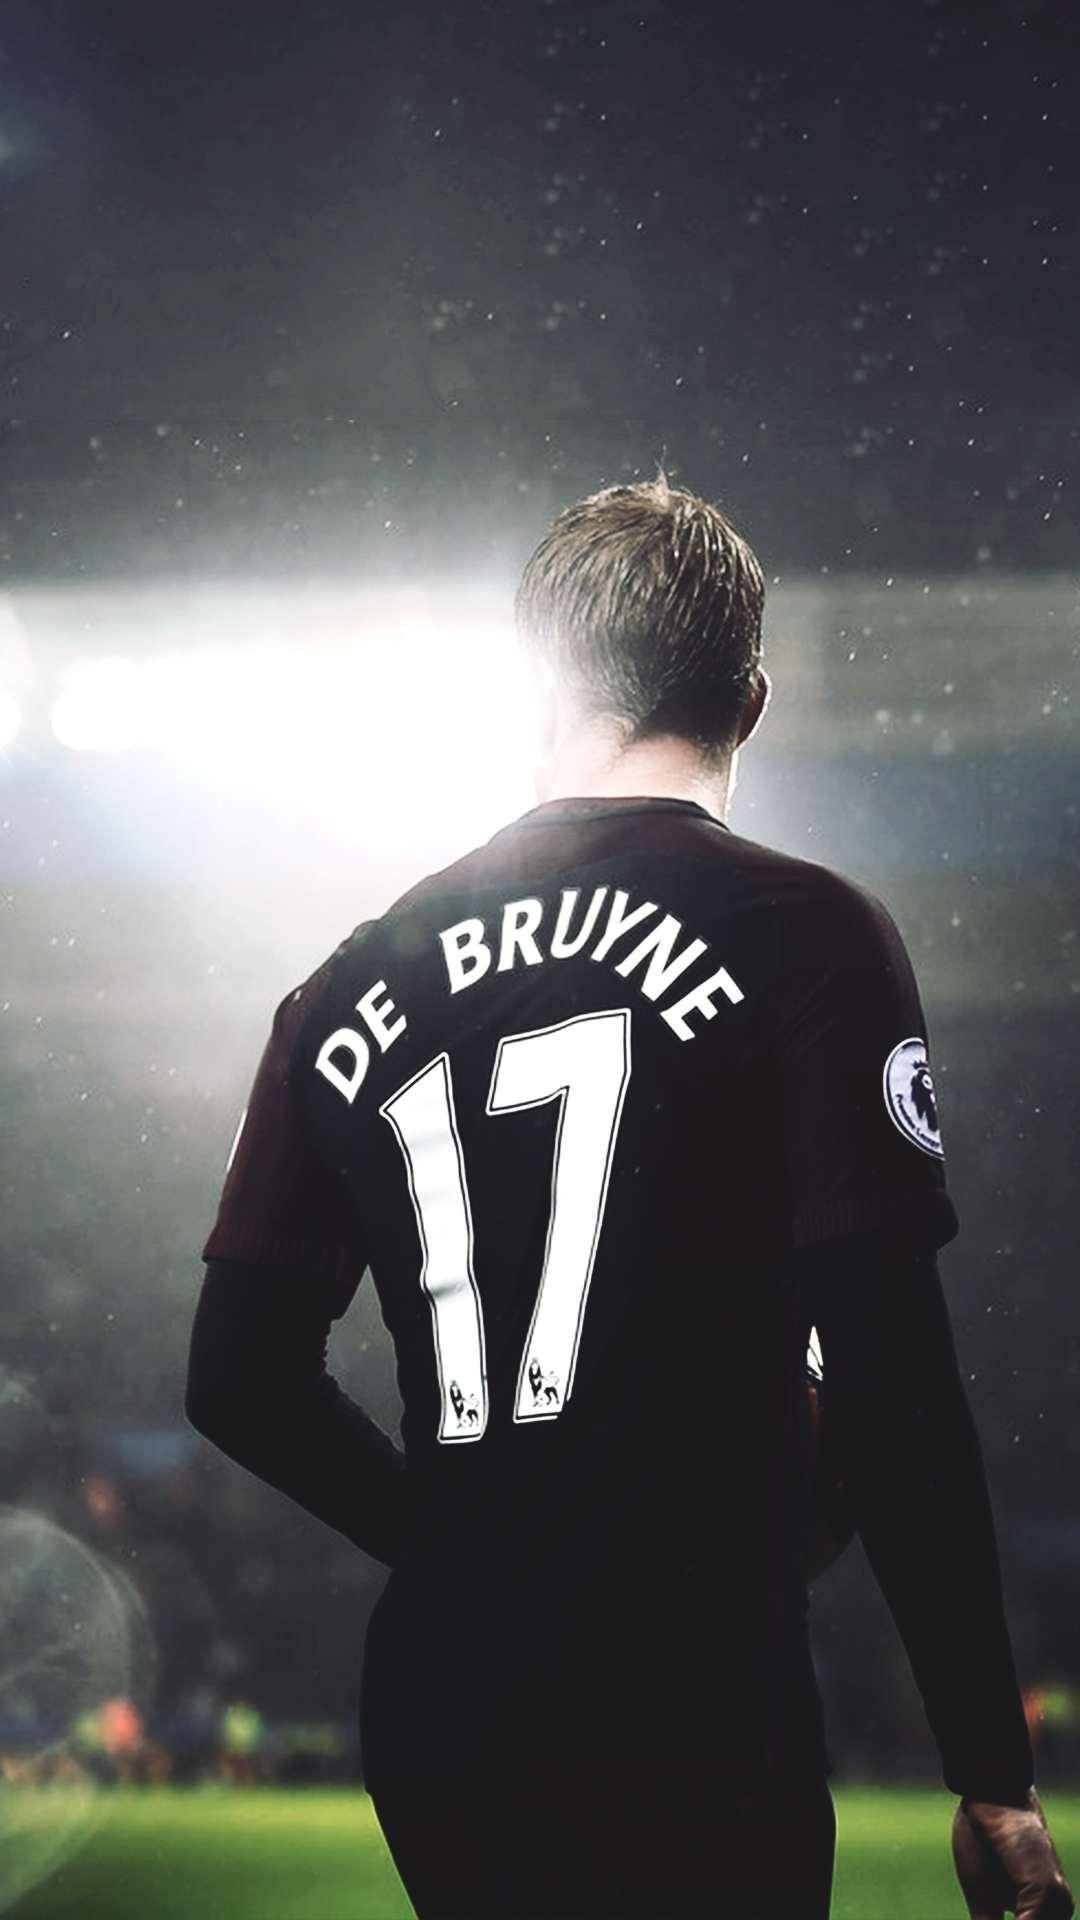 Kevin De Bruyne wallpapers, Android APK download, Manchester City logo, Manchester City football club, 1080x1920 Full HD Handy